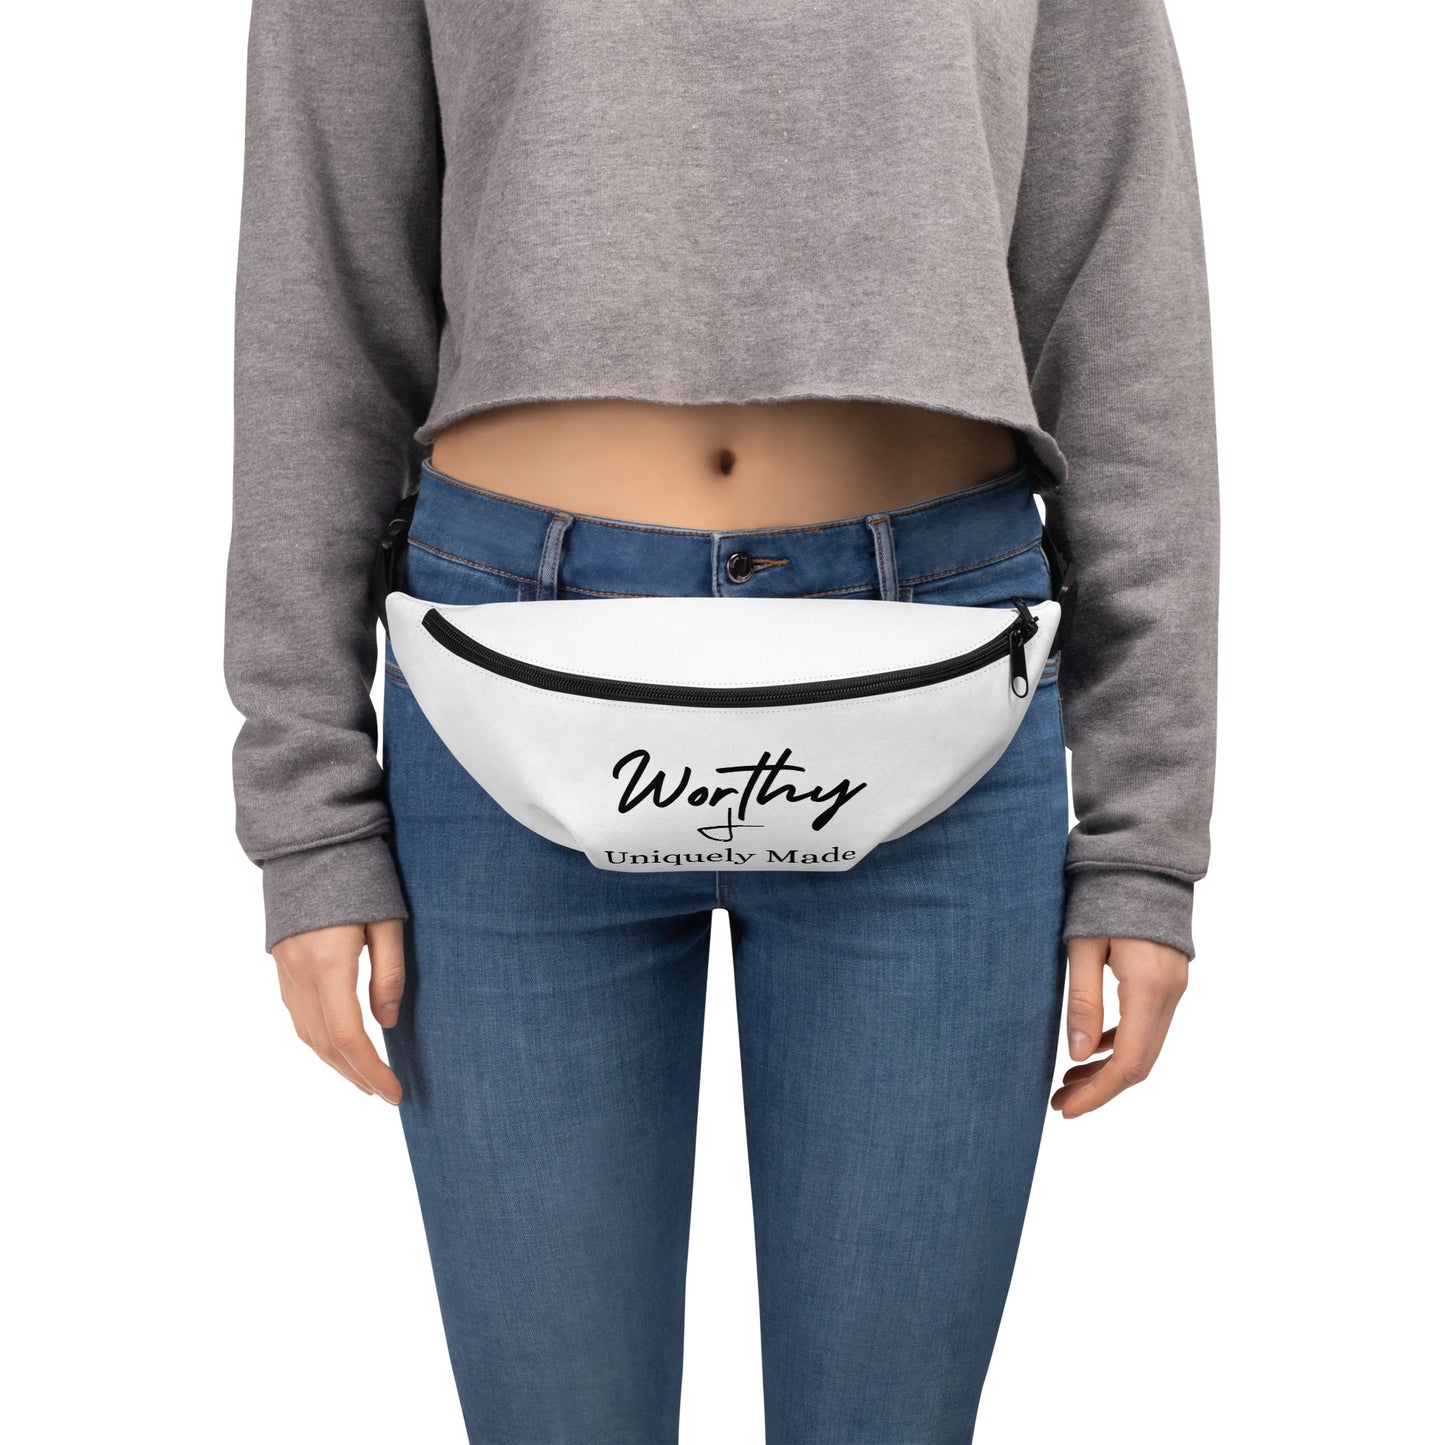 WORTHY AND UNIQUELY MADE Fanny Pack